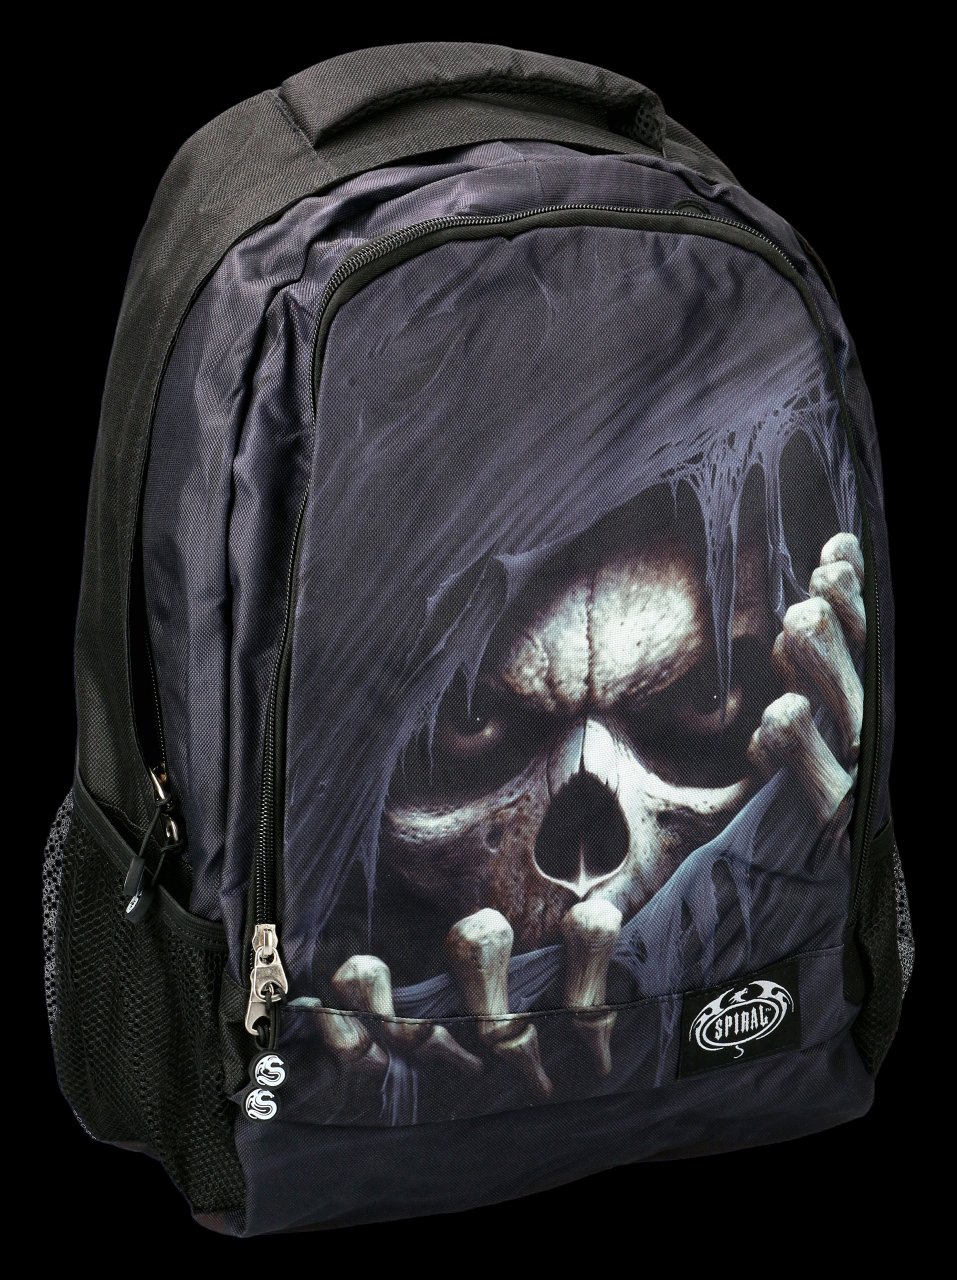 Spiral Gothic Backpack with Laptop Pocket - Grim Reaper